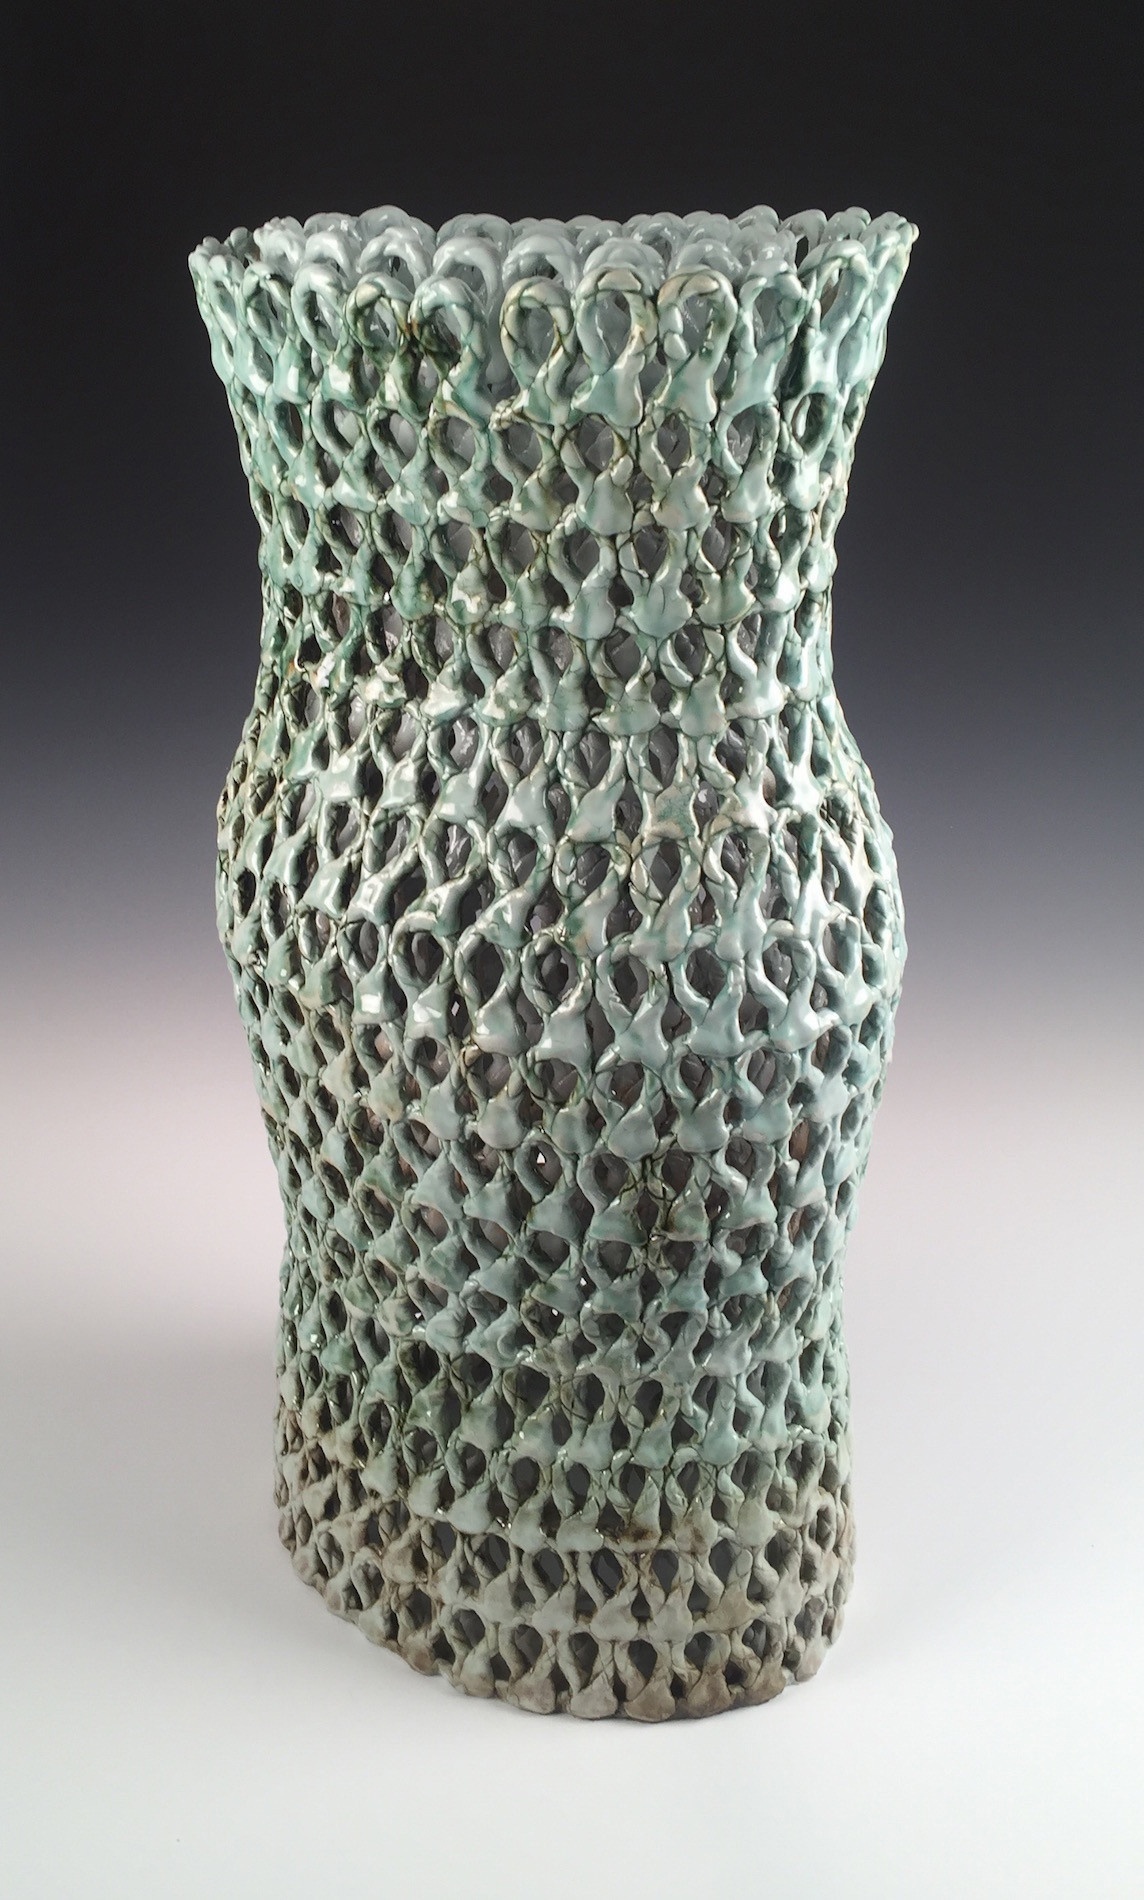 A tall, intricately looped/patterned and layered vessel in a light sage color.